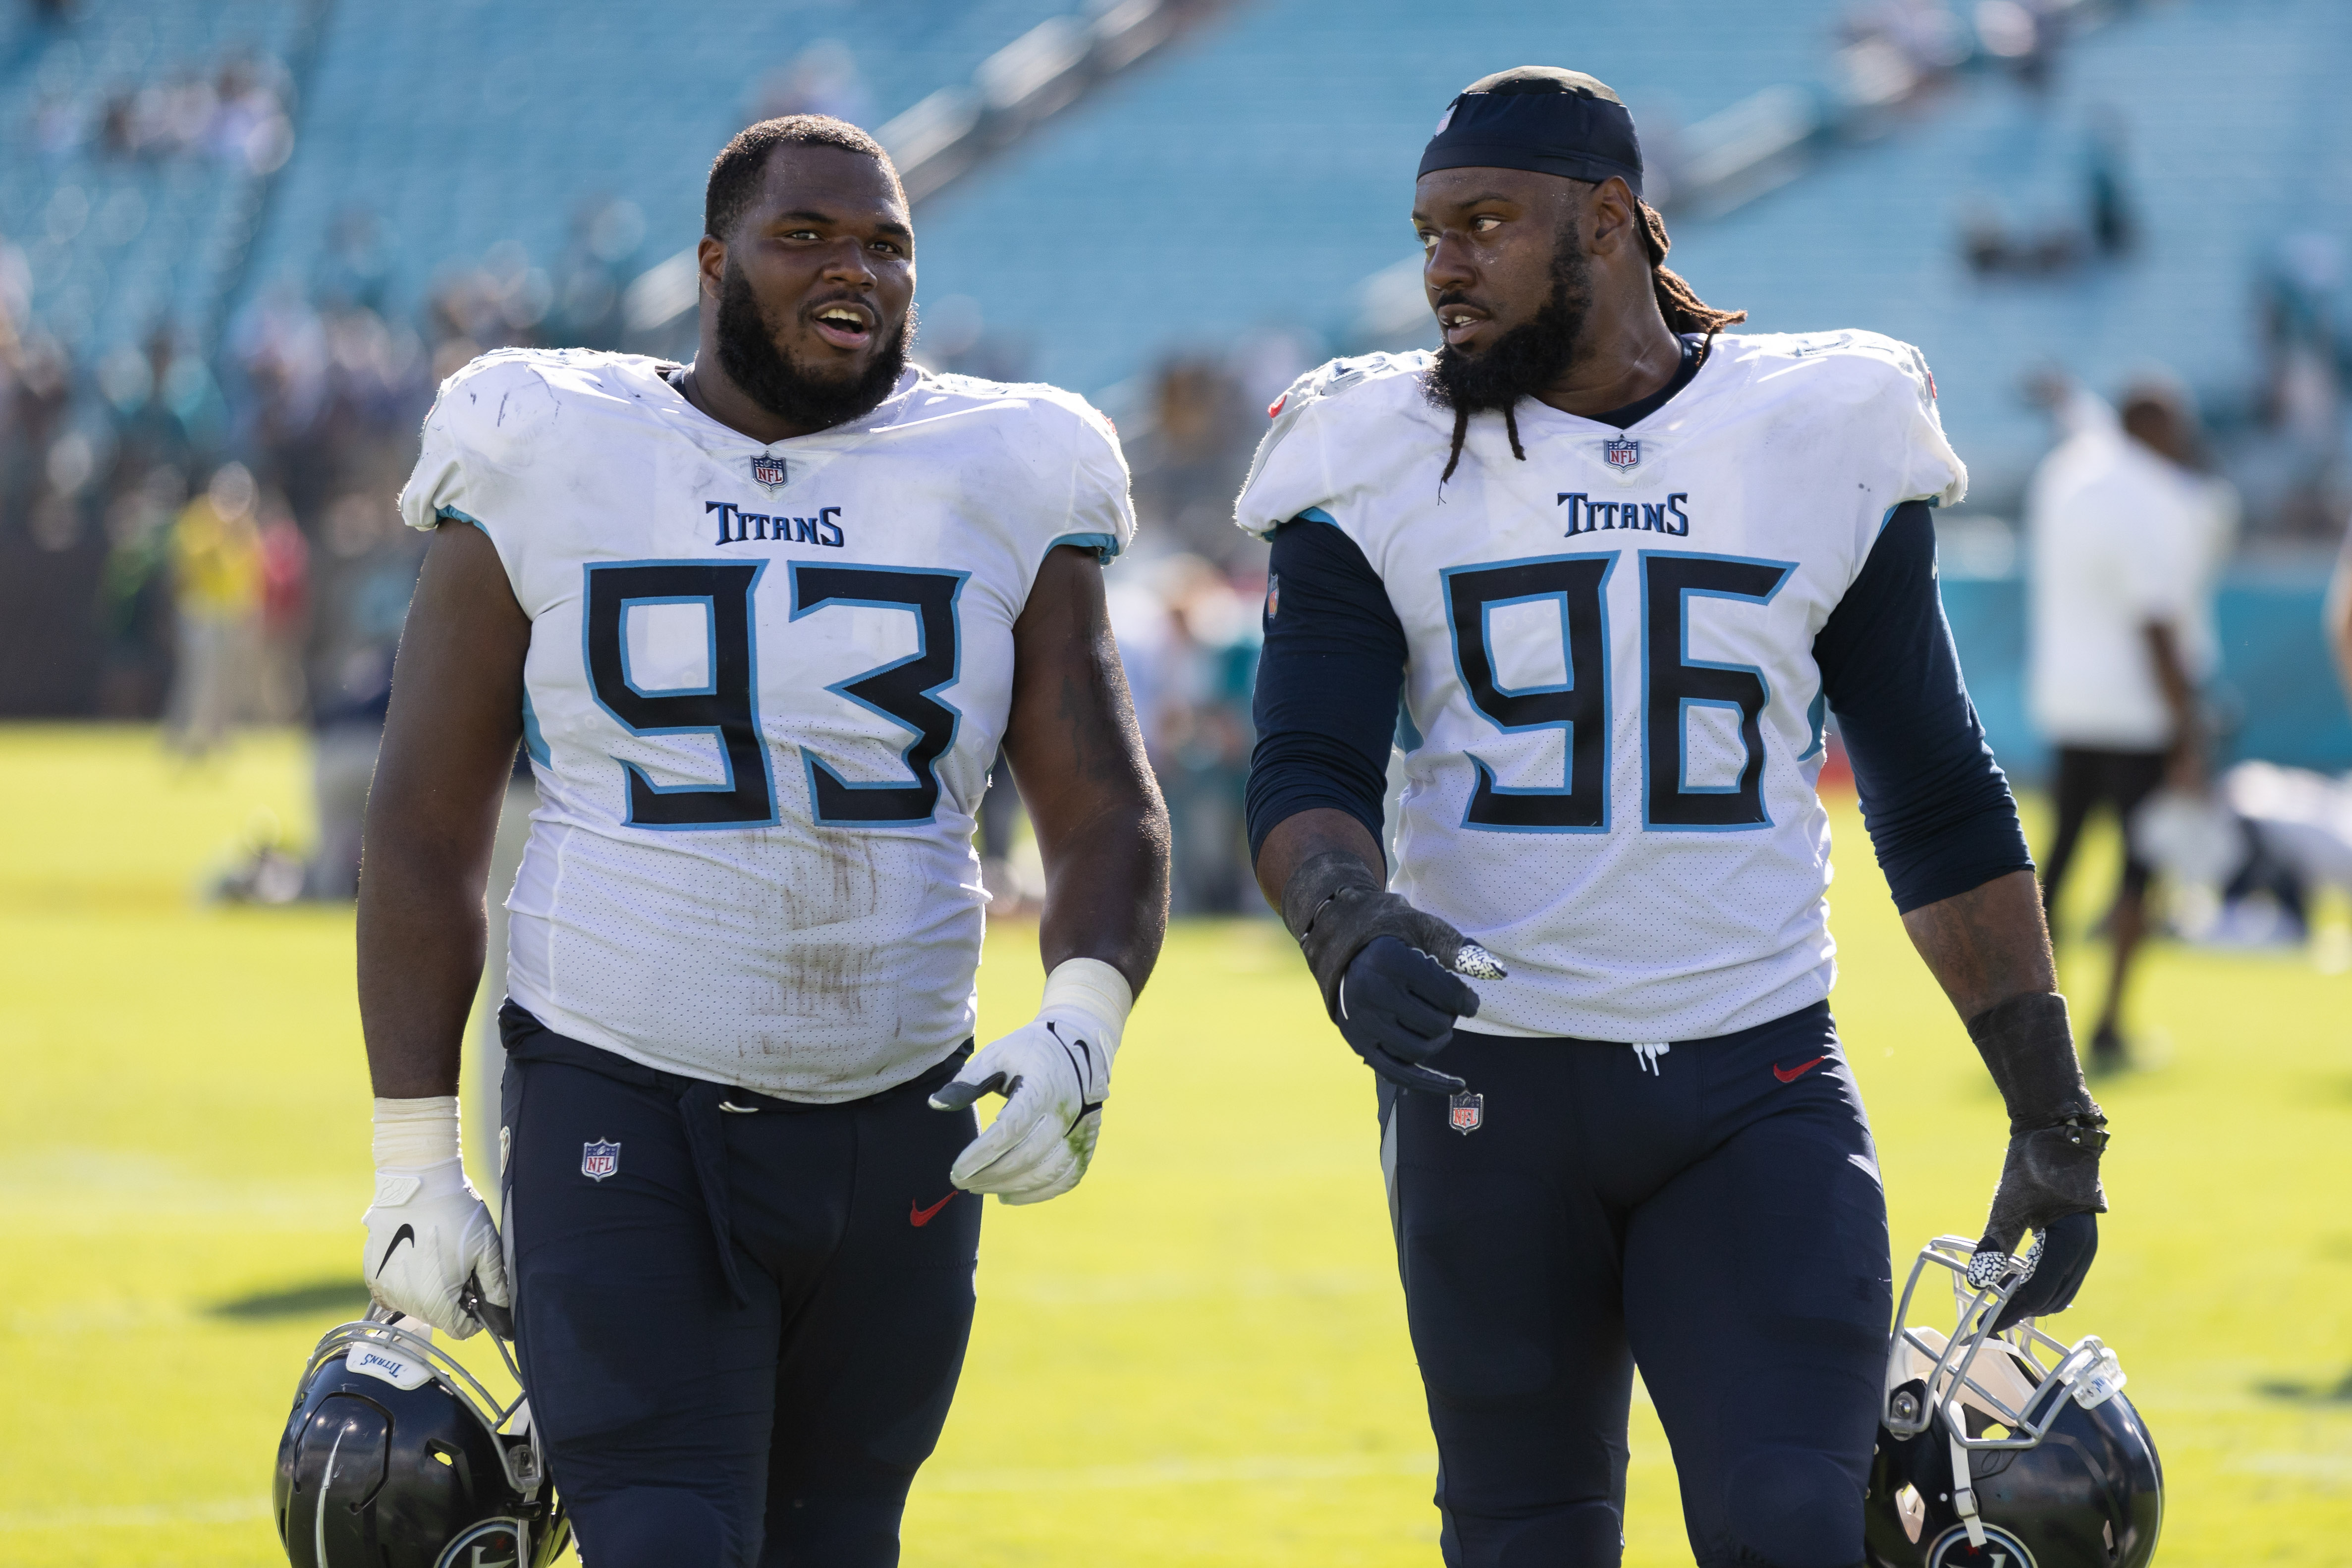 Oct 10, 2021; Jacksonville, Florida, USA; Tennessee Titans defensive tackle Teair Tart (93) and Tennessee Titans defensive end Denico Autry (96) walk off the field after the game against the Jacksonville Jaguars at TIAA Bank Field. Mandatory Credit: Matt Pendleton-USA TODAY Sports